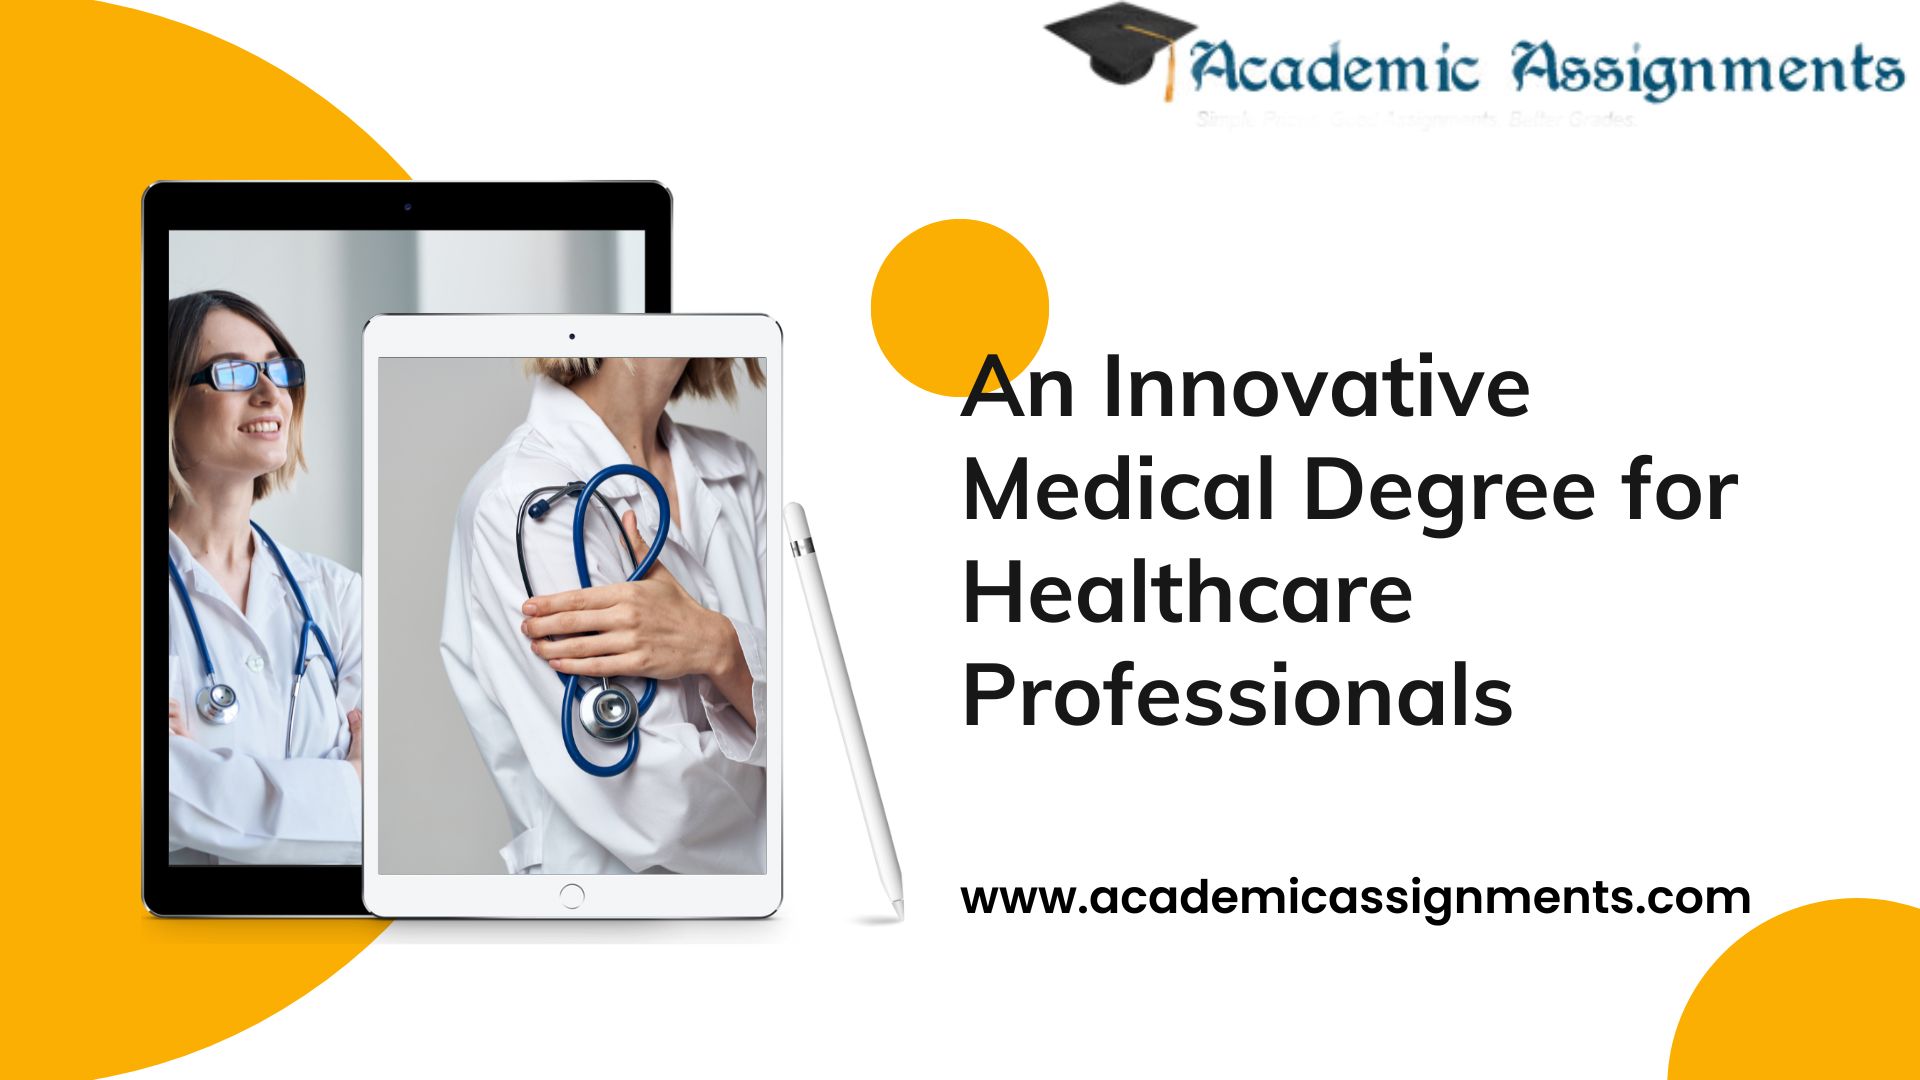 An Innovative Medical Degree for Healthcare Professionals